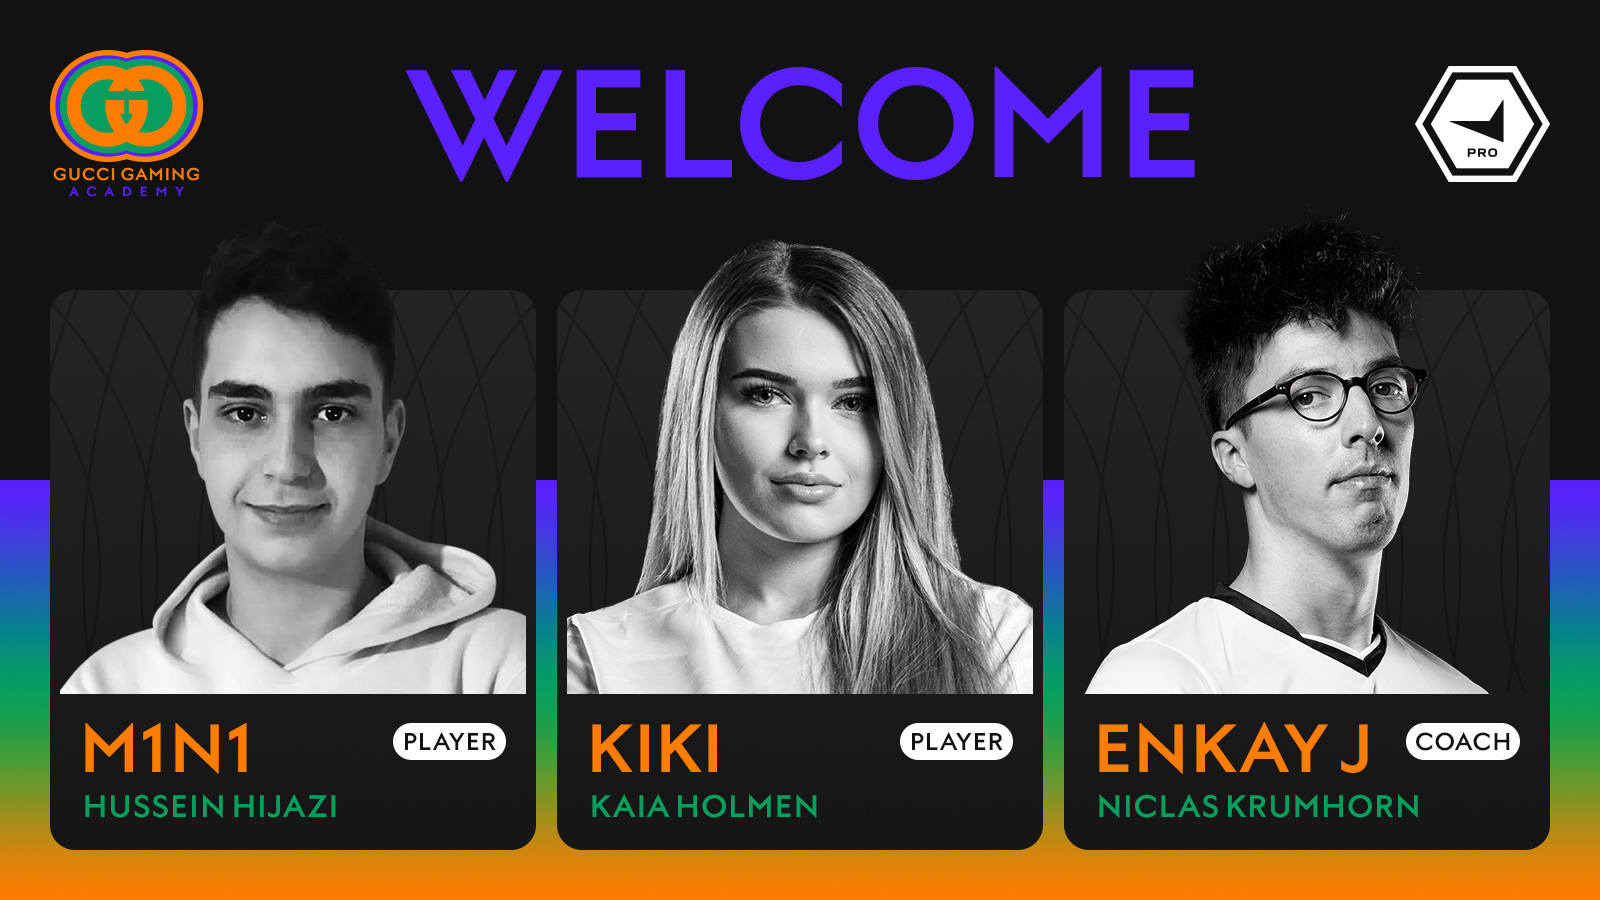 gucci on X: The Gucci Gaming Academy is proud to welcome three new faces  to its development program empowering young esports talents while creating  a healthier playing environment. Welcome players @KiKiicsgo and @